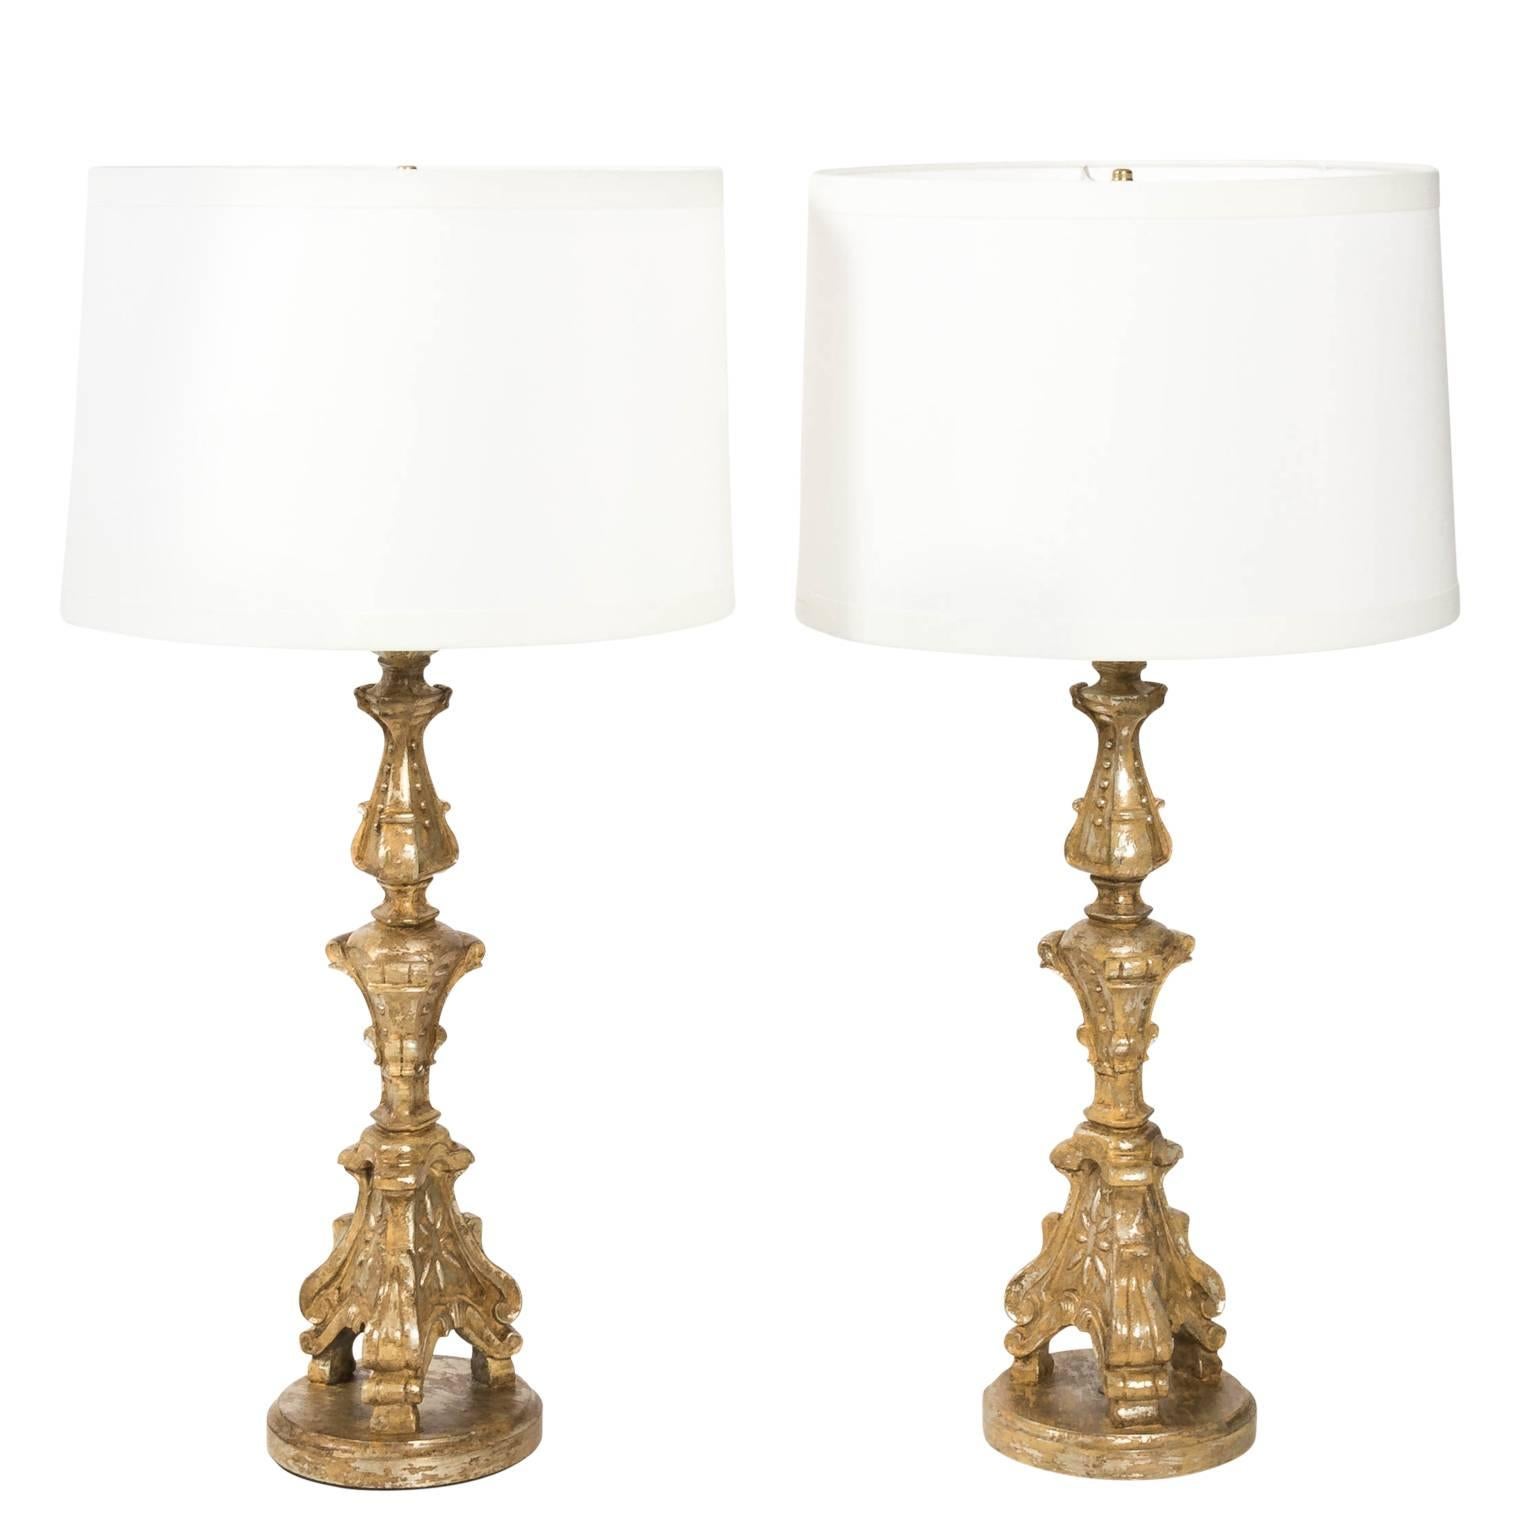 Pair of Gilded Candlestick Lamps